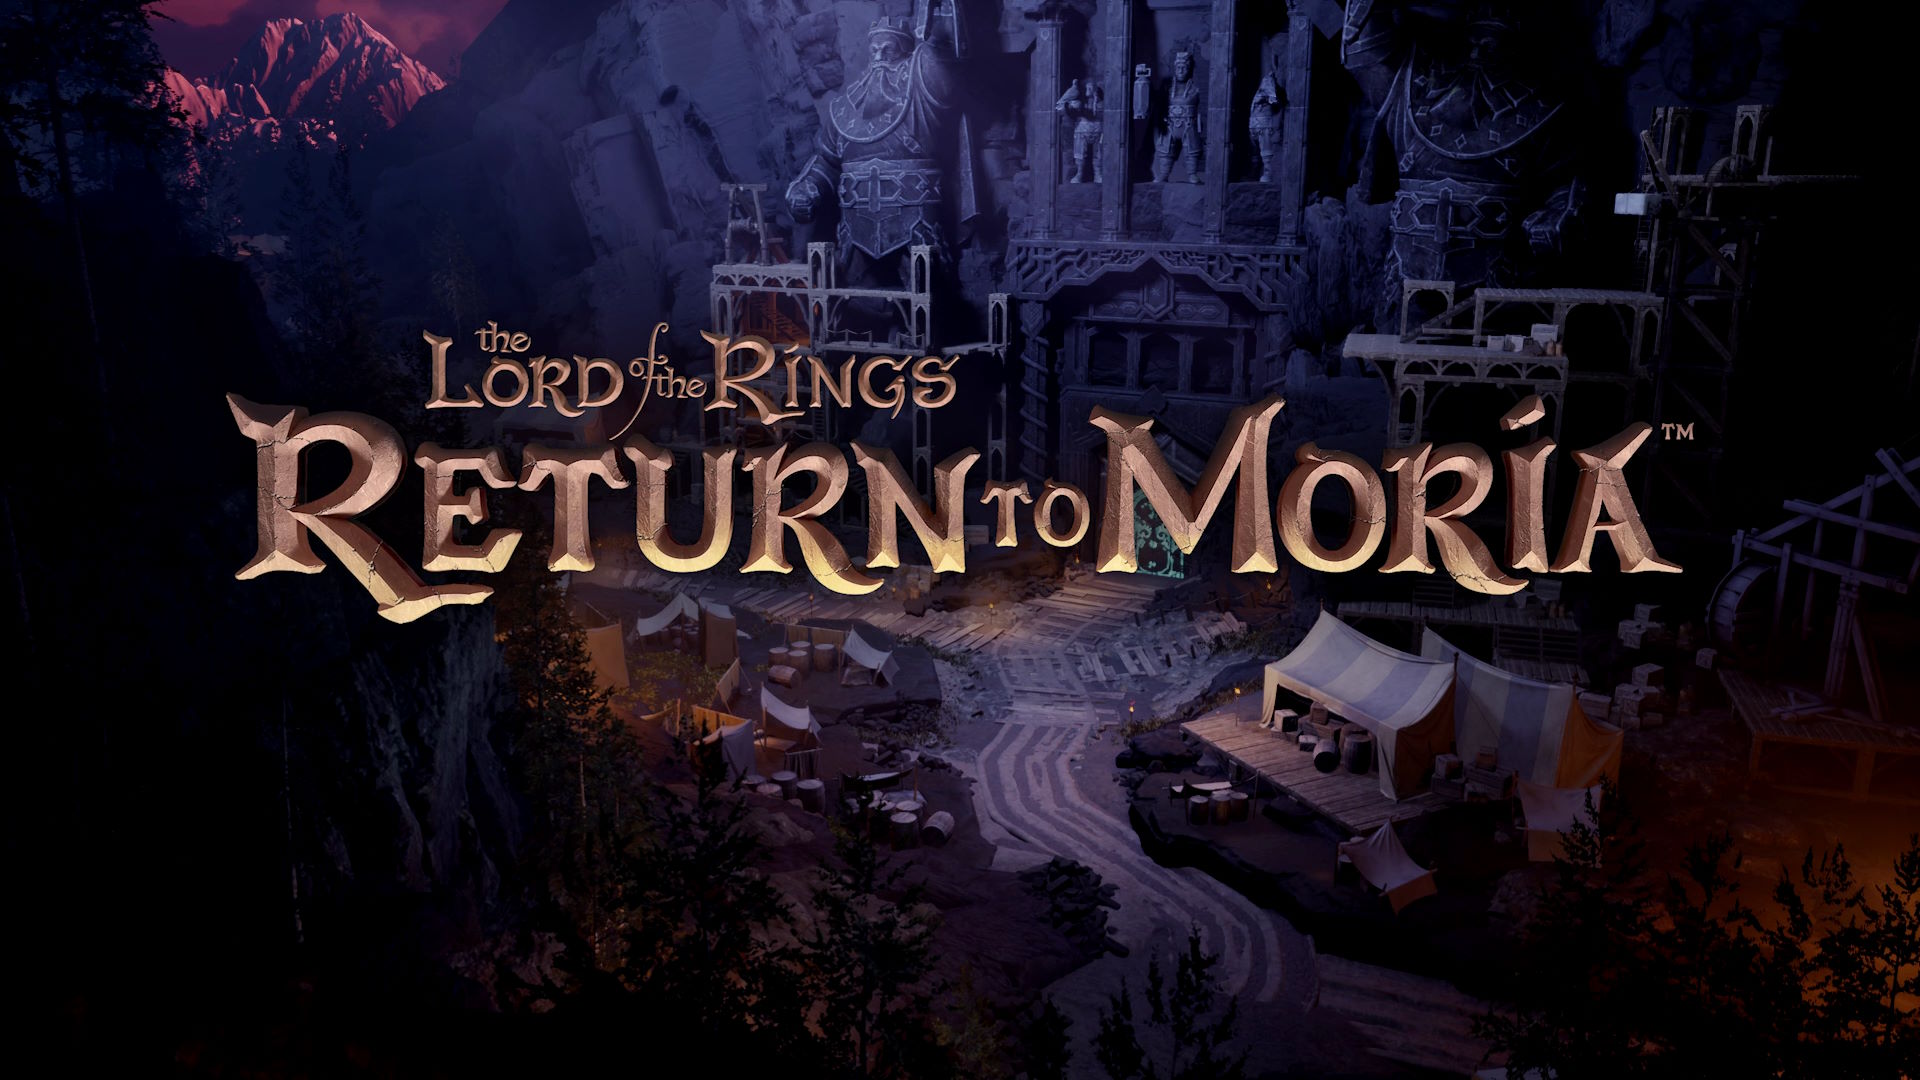 Digging into The Lord of the Rings: Return to Moria development